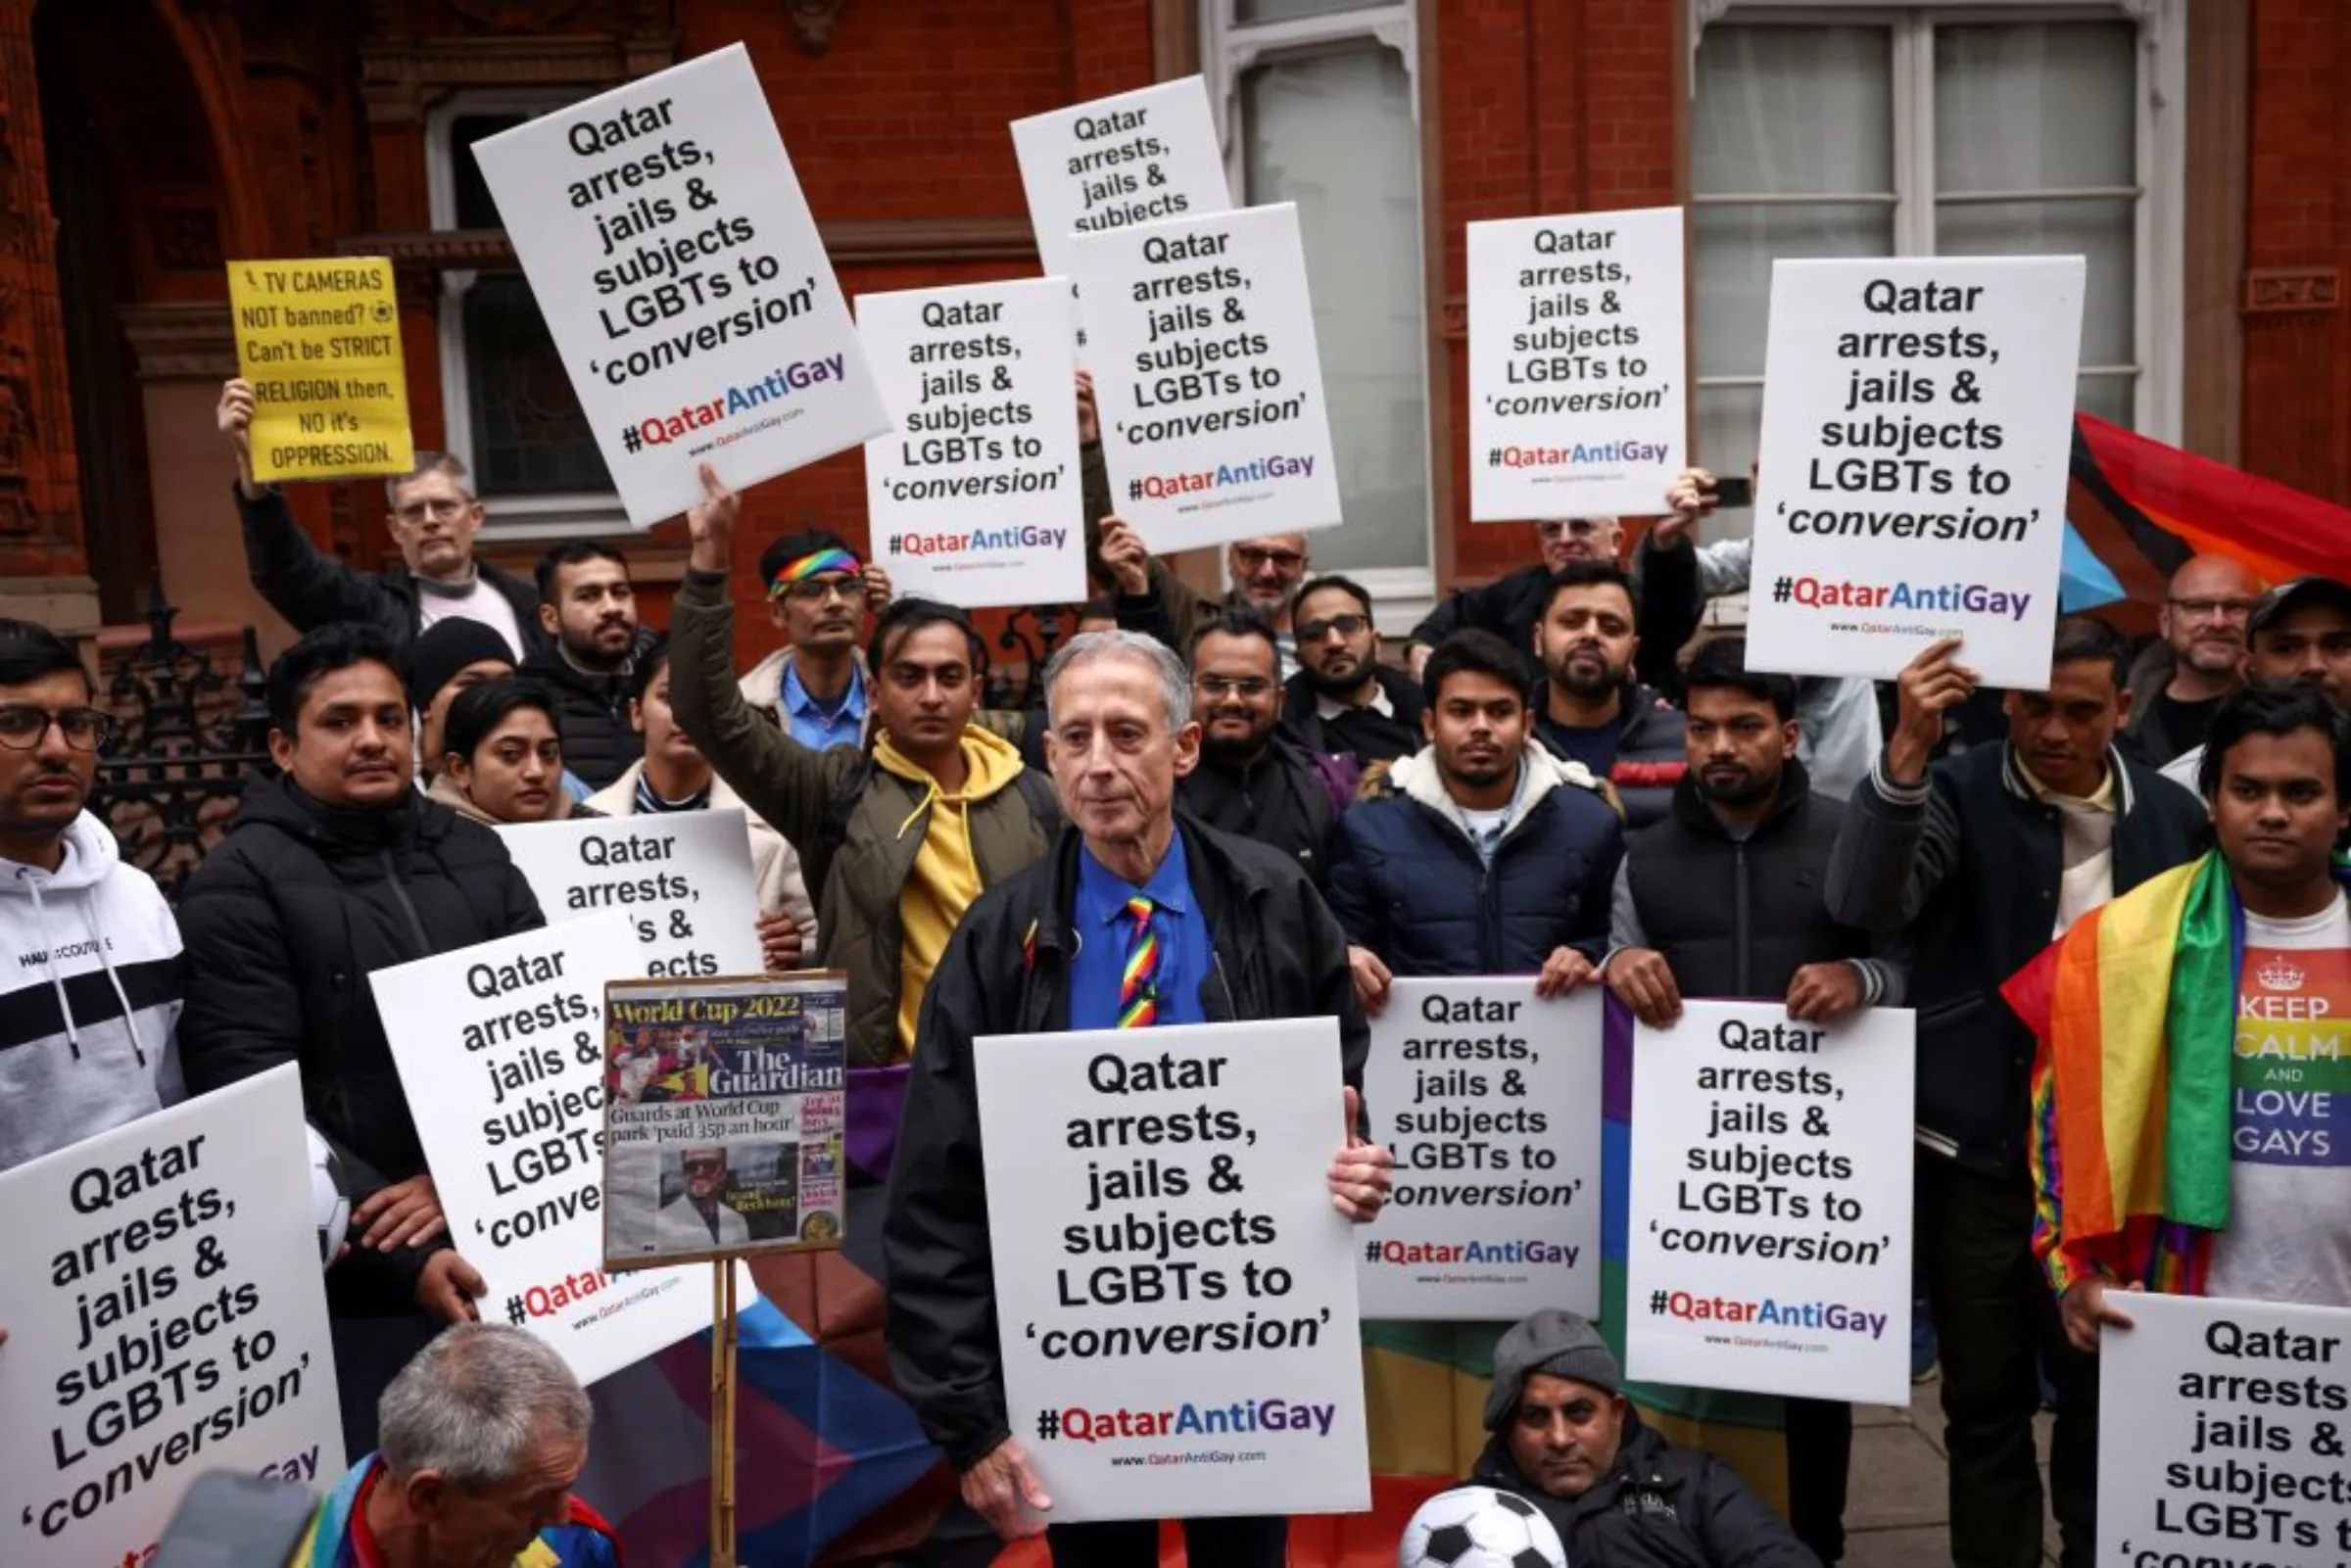 Gay rights campaigner Peter Tatchell stands among people as they demonstrate ahead of World Cup outside the Qatar embassy in London, Britain November 19, 2022. REUTERS/Henry Nicholls